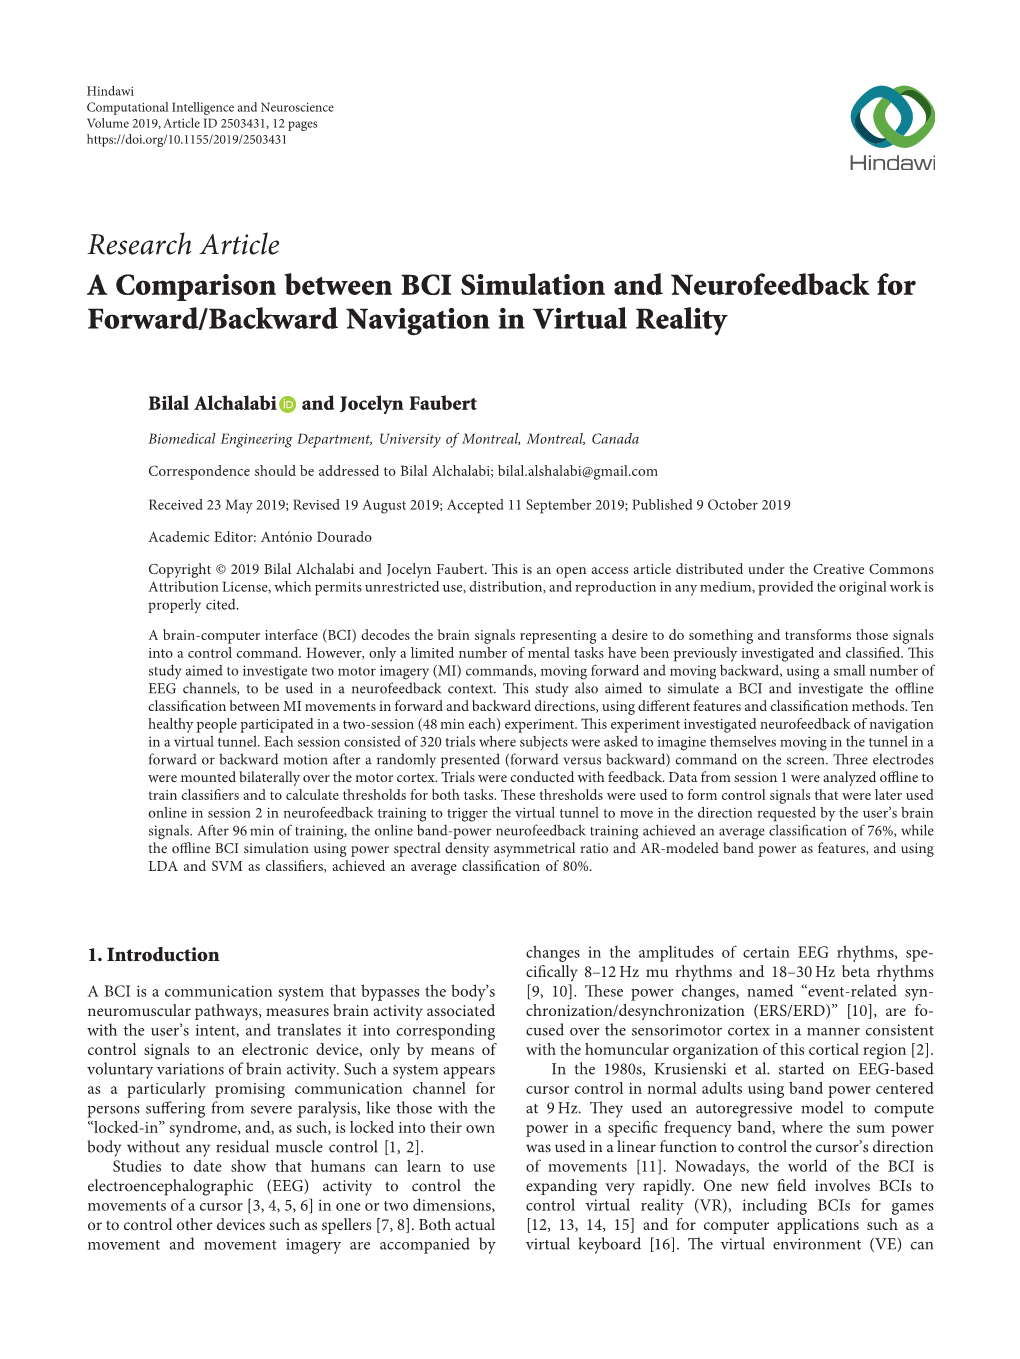 Research Article a Comparison Between BCI Simulation and Neurofeedback for Forward/Backward Navigation in Virtual Reality